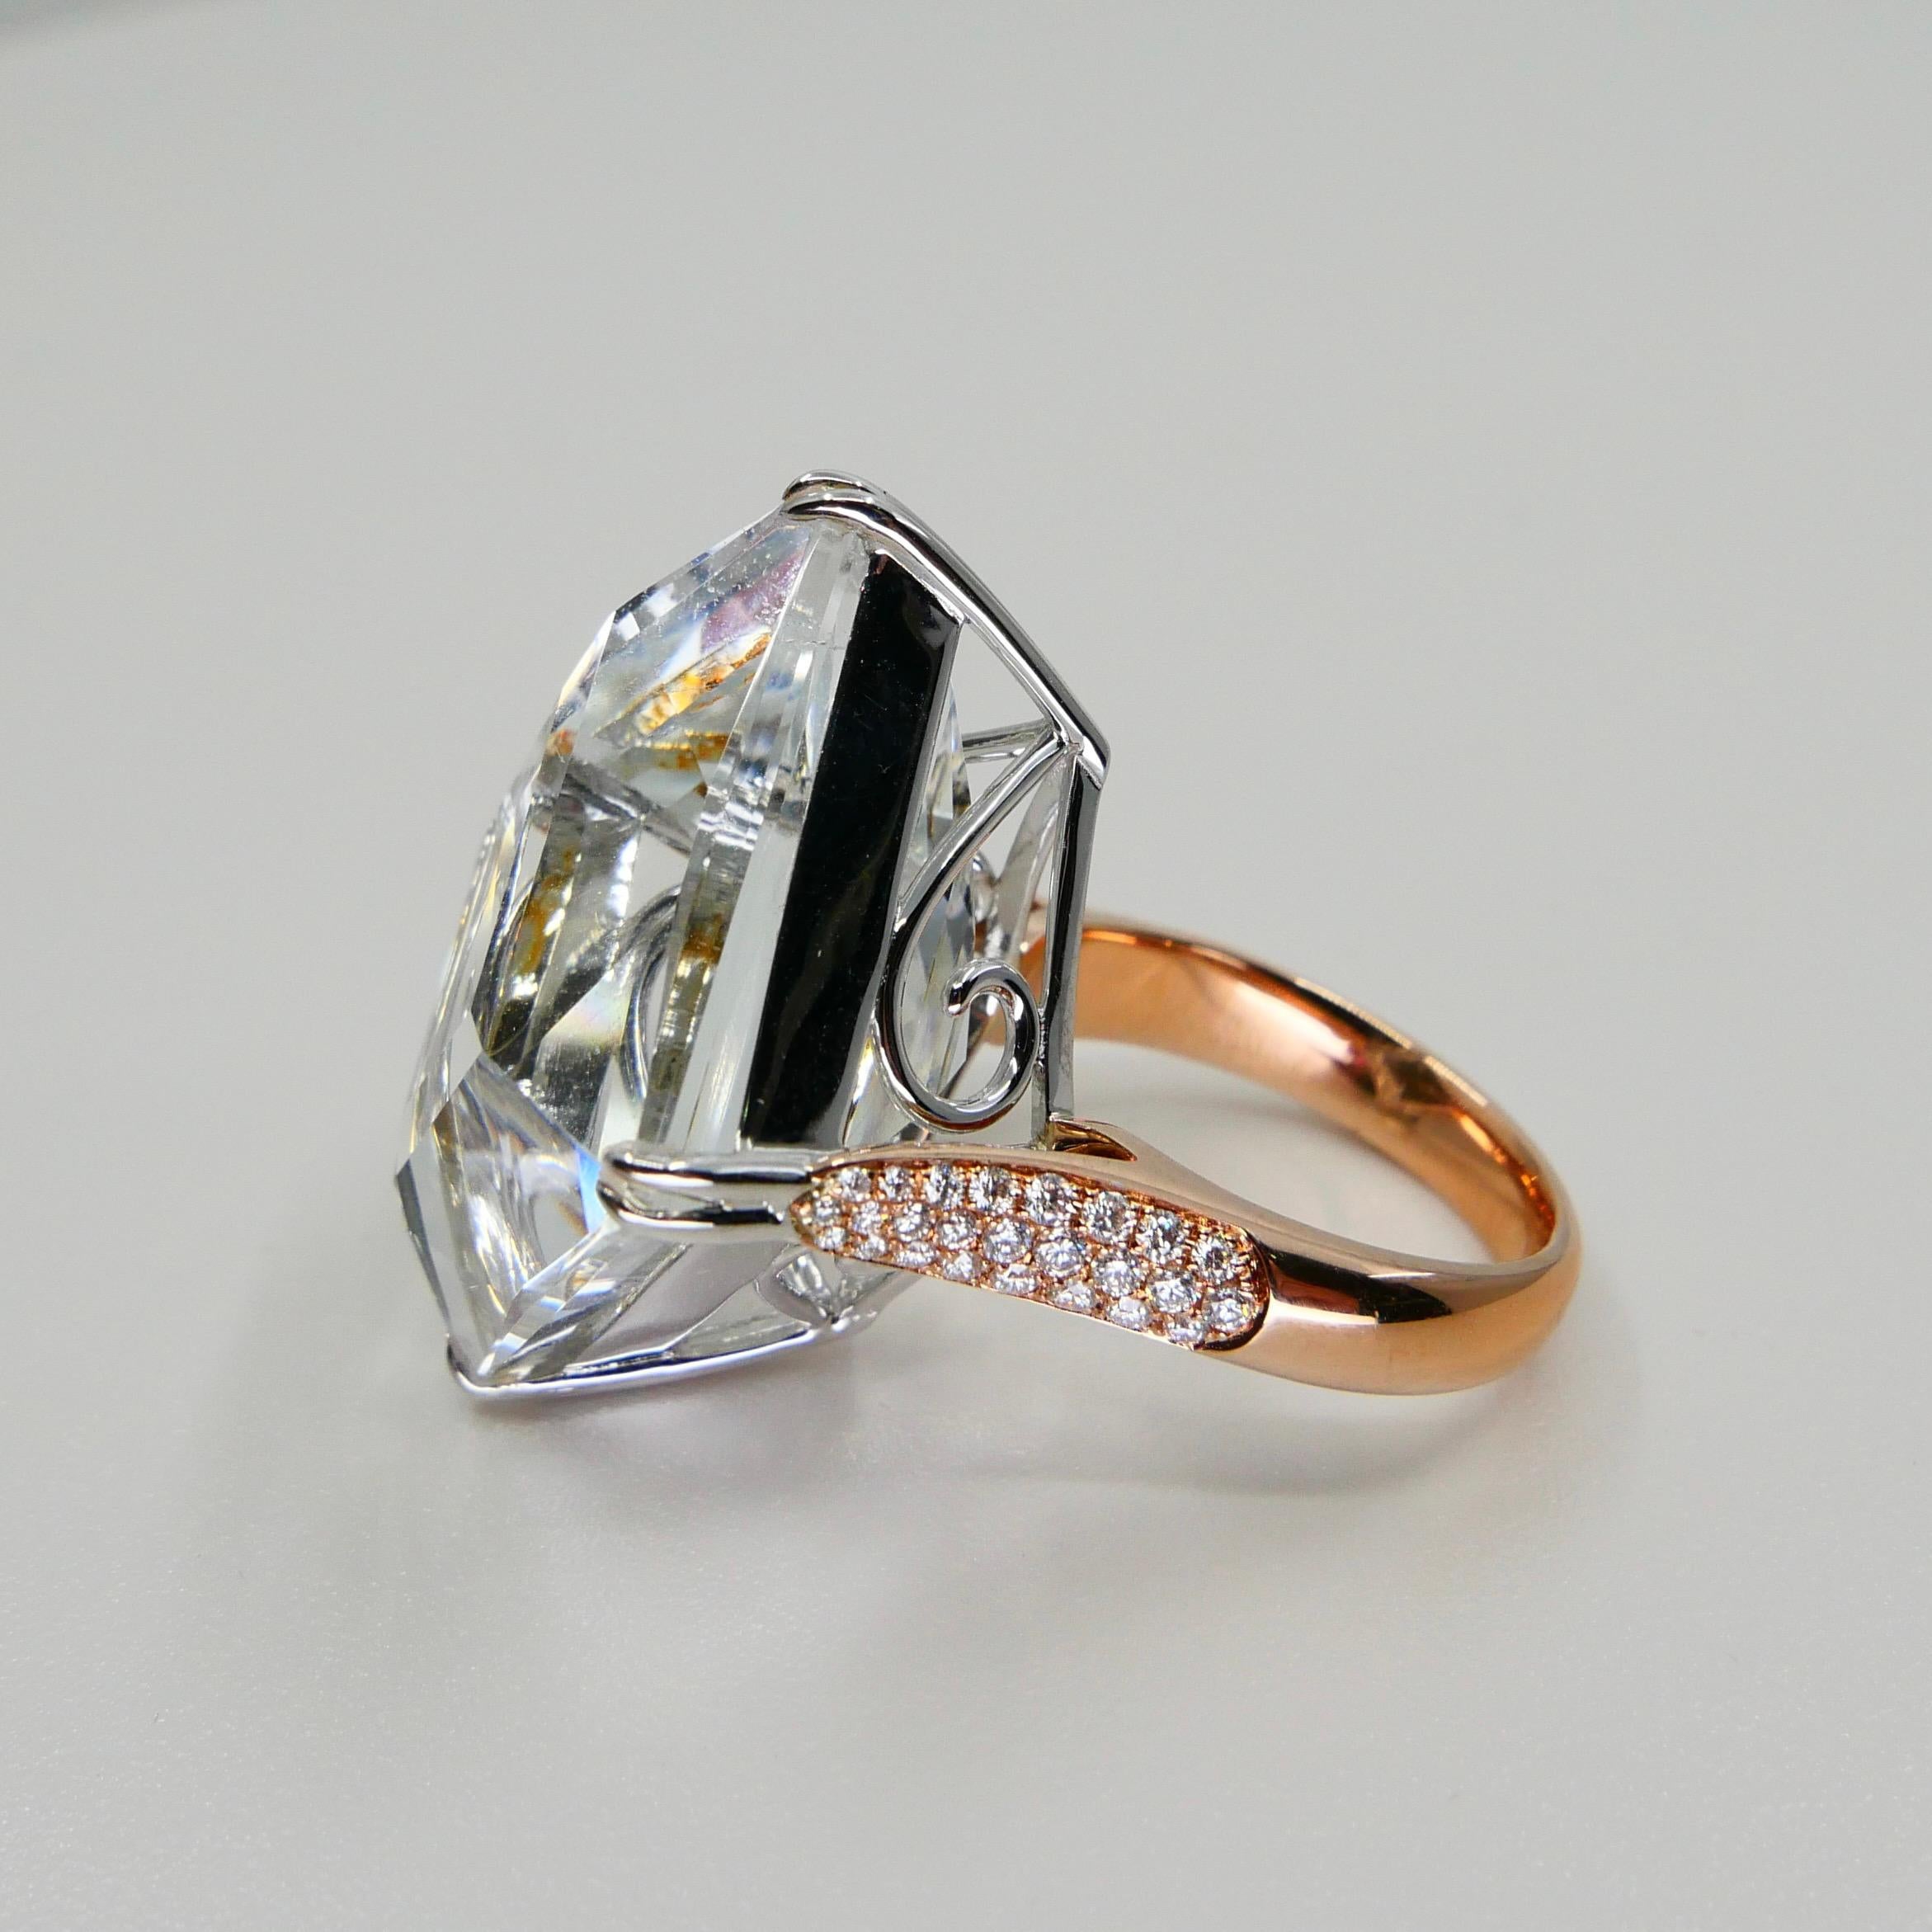 49.02 Carat Kite Step Cut White Topaz and Diamond Cocktail Ring, Massive For Sale 7